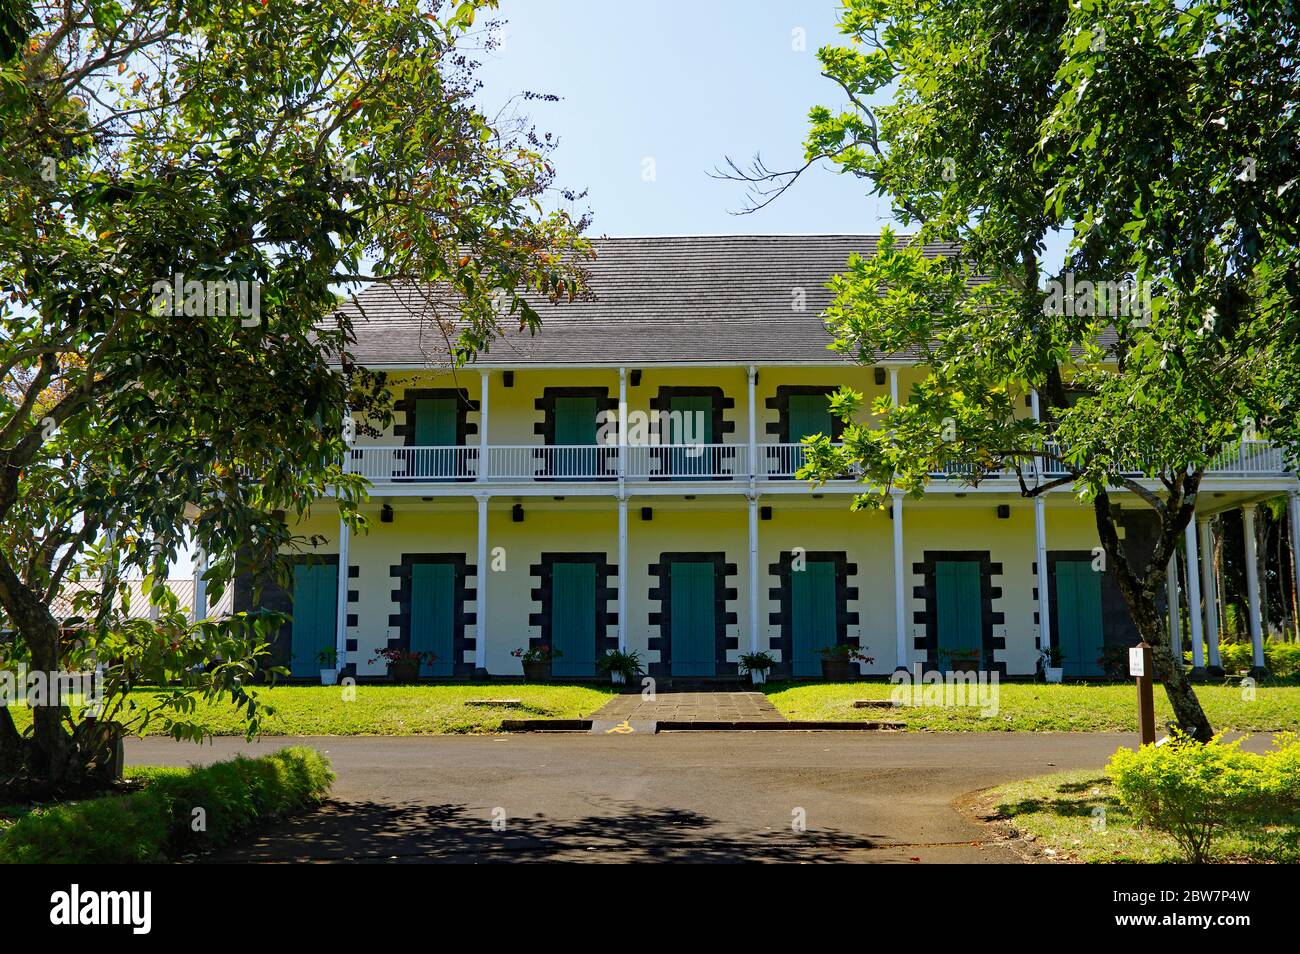 PORT LOUIS/ MAURITIUS - AUGUST 14, 2018: Colonial manor house named 'Château Mon Plaisir' in the Sir Seewoosagur Ramgoolam Botanical Garden. This is a Stock Photo